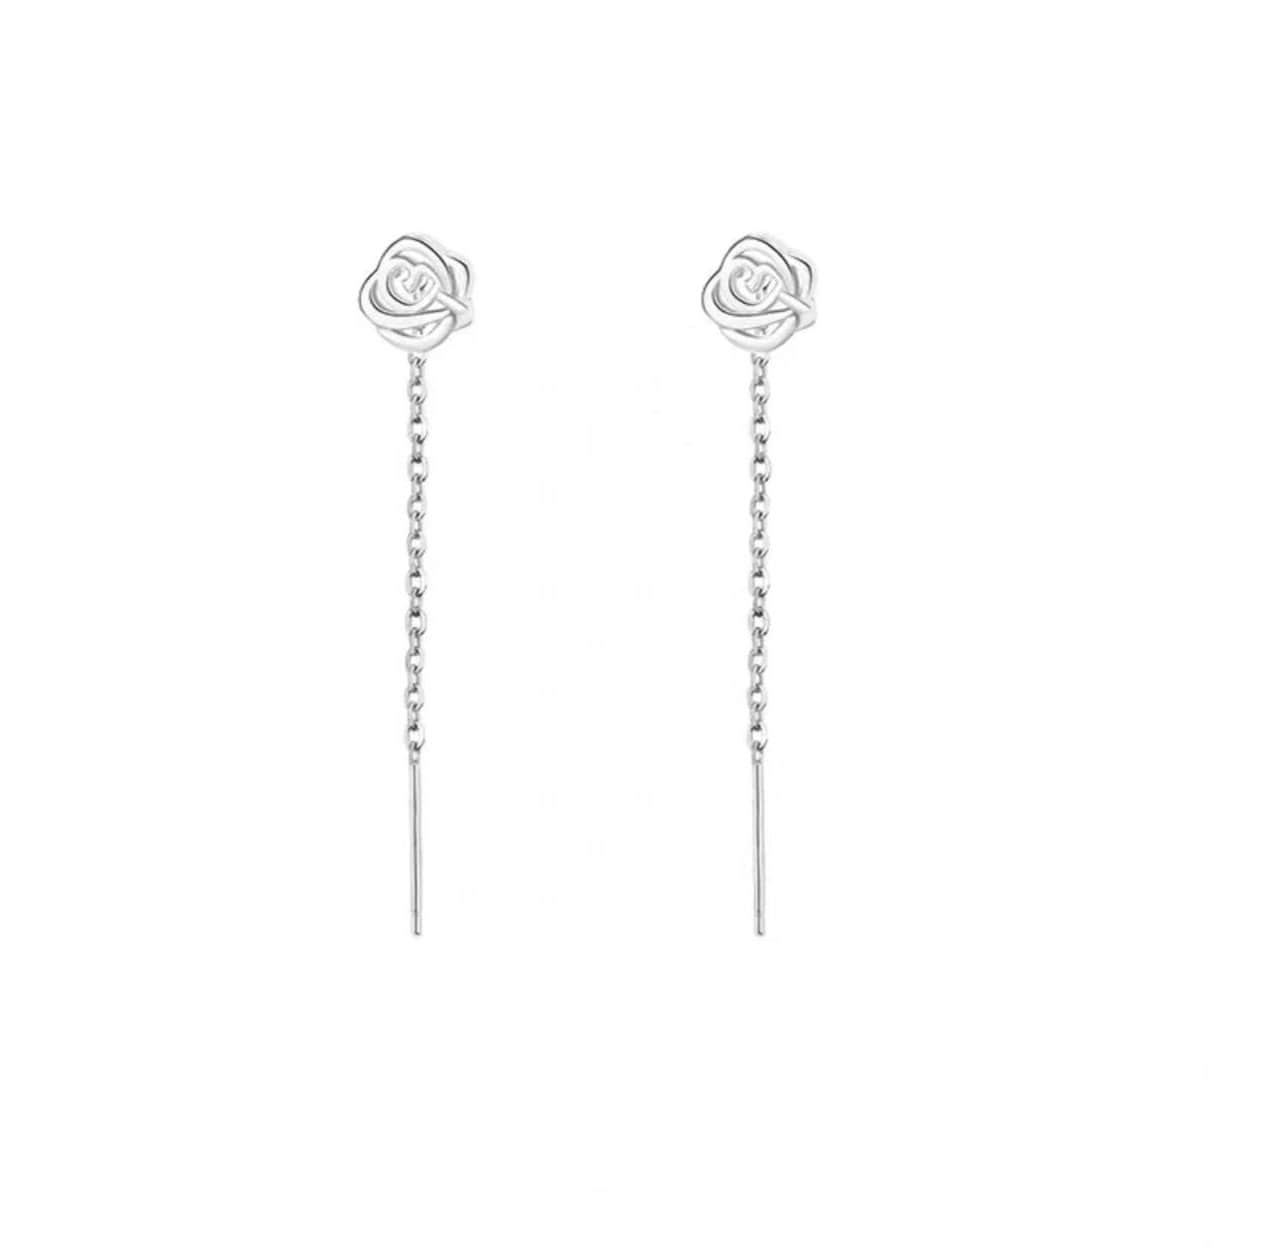 925 Sterling Silver ear line, Floral ear stud, Delicate earrings, Gifts for Her.